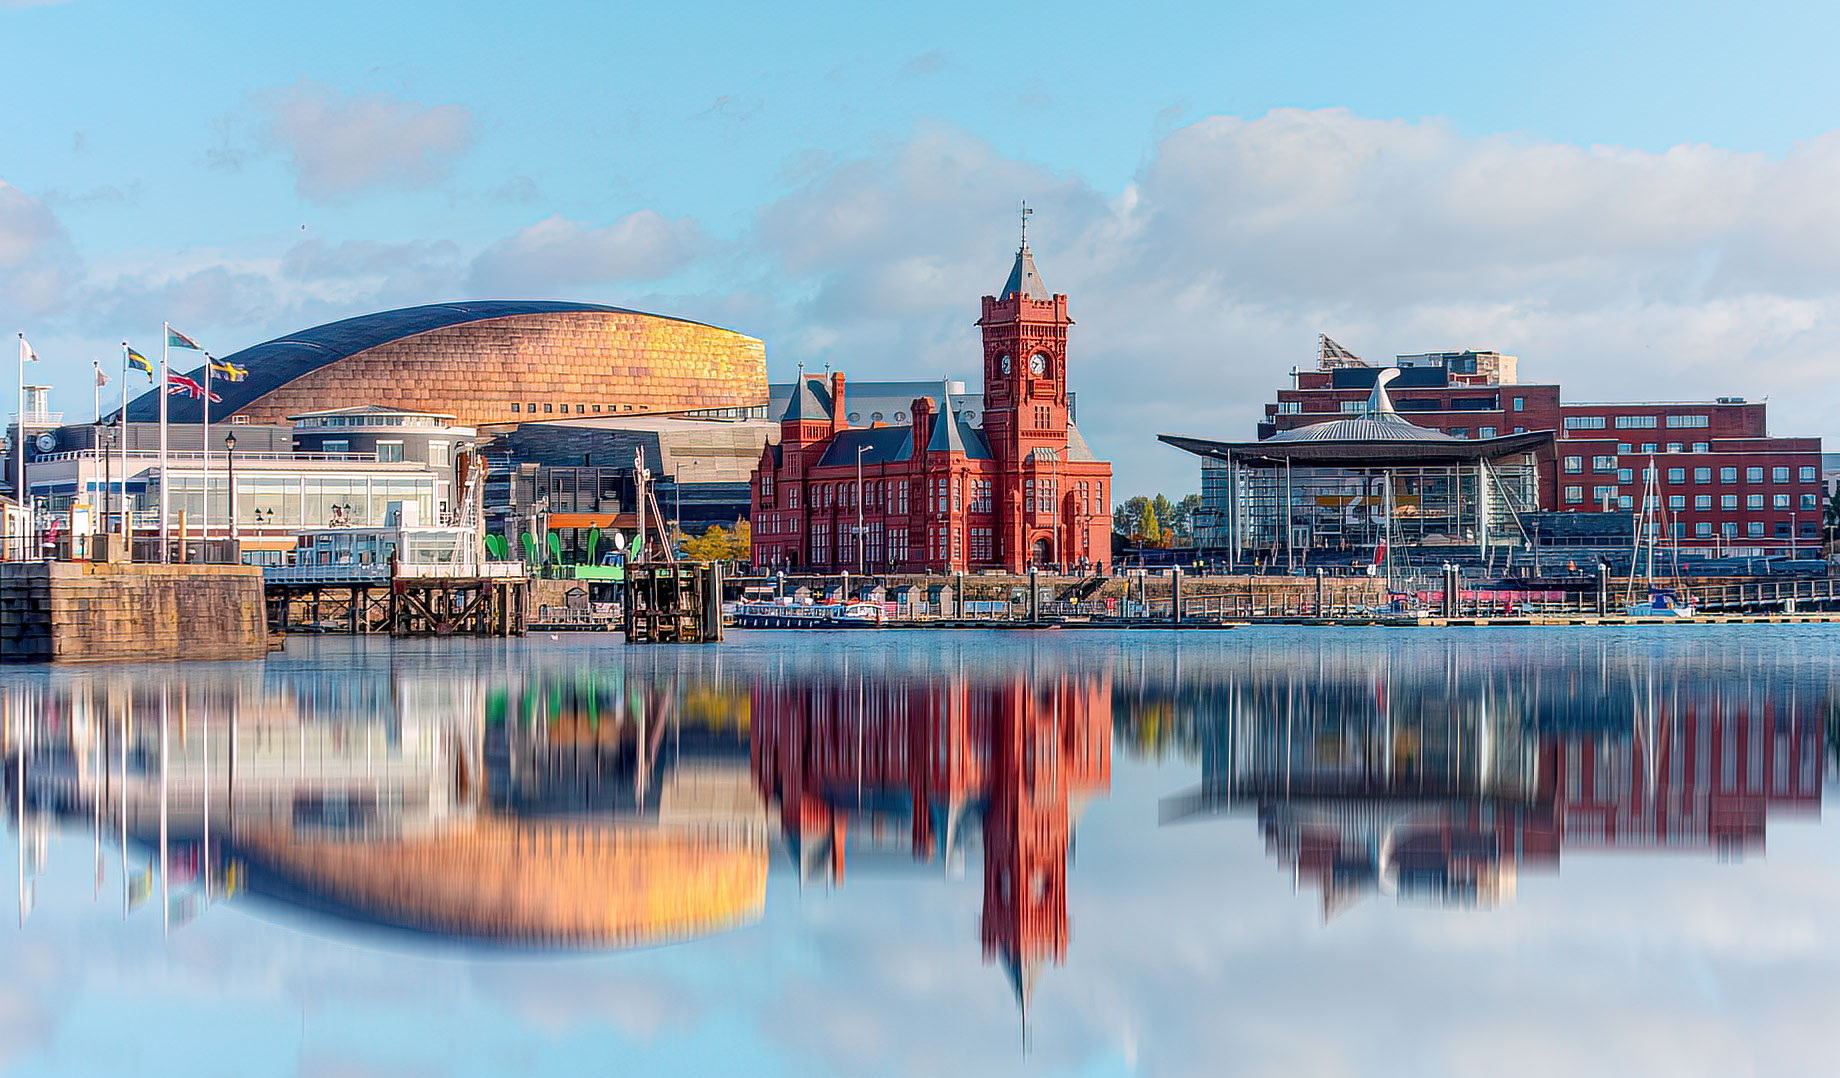 Panoramic View of Cardiff Bay – Cardiff, Wales